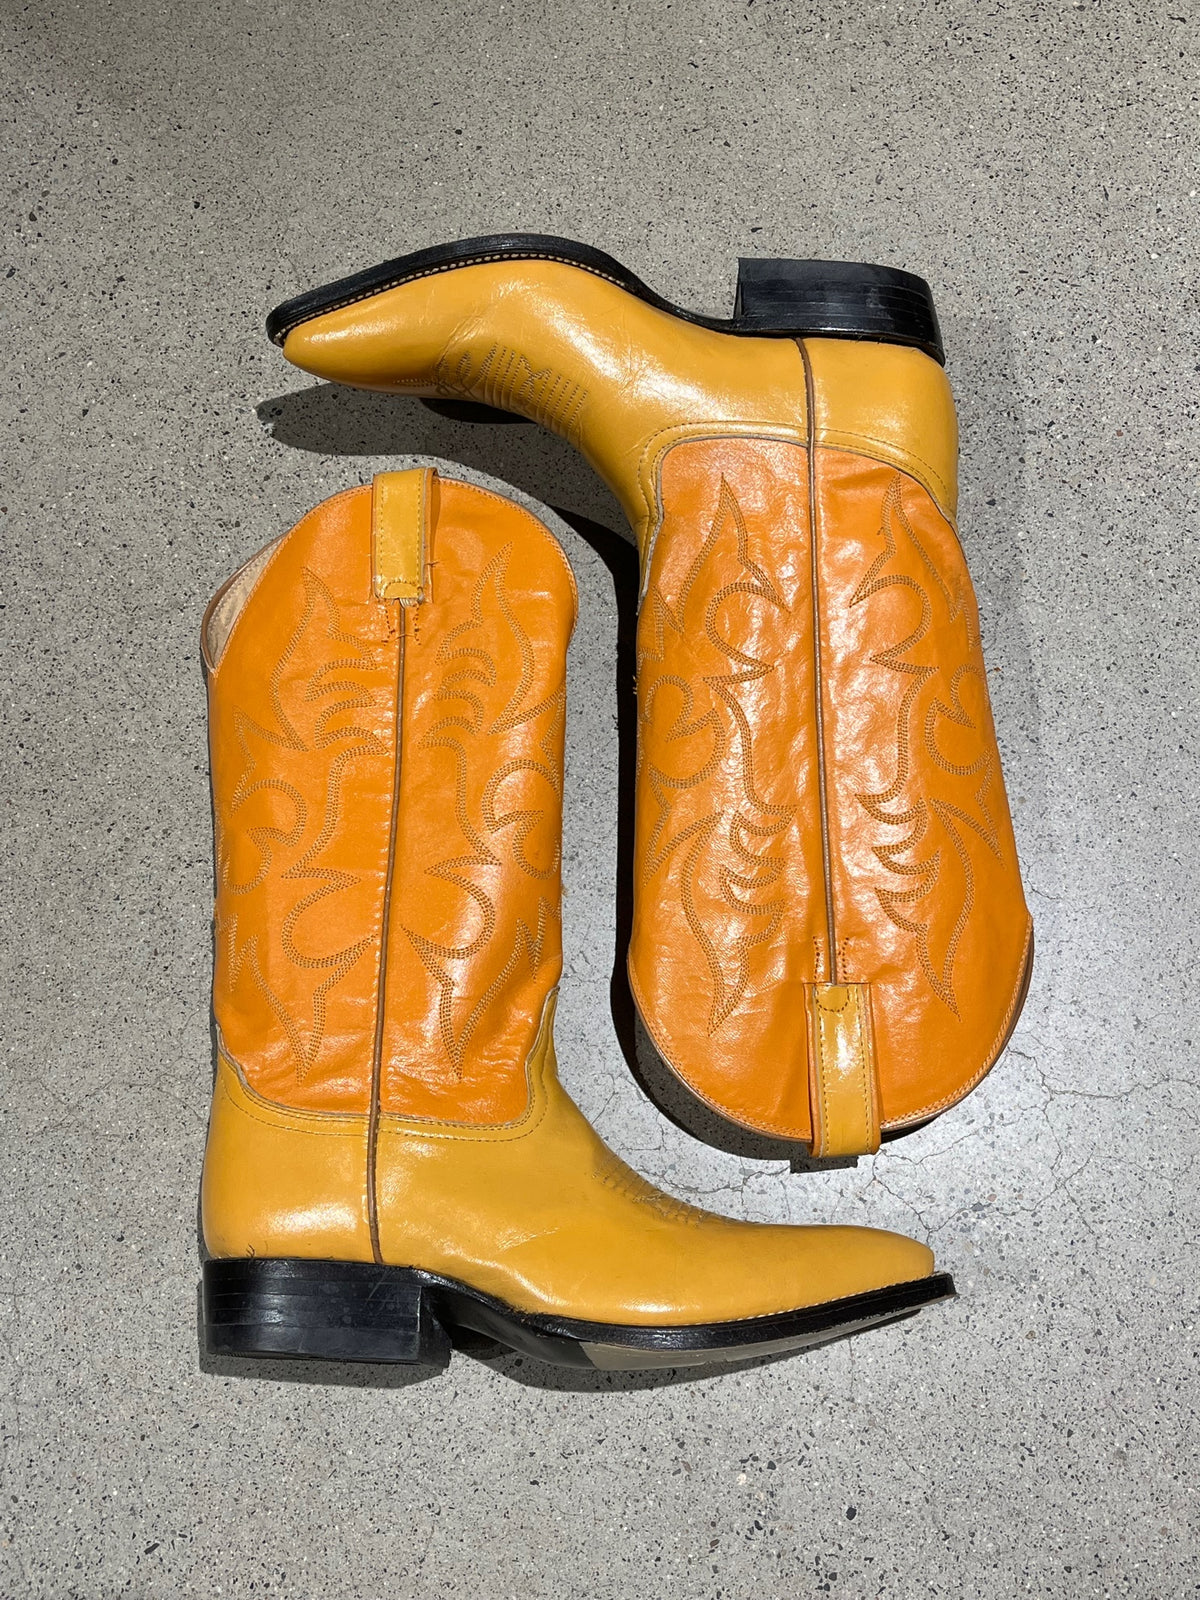 Vintage Two Tone Yellow Leather Cowboy Boots